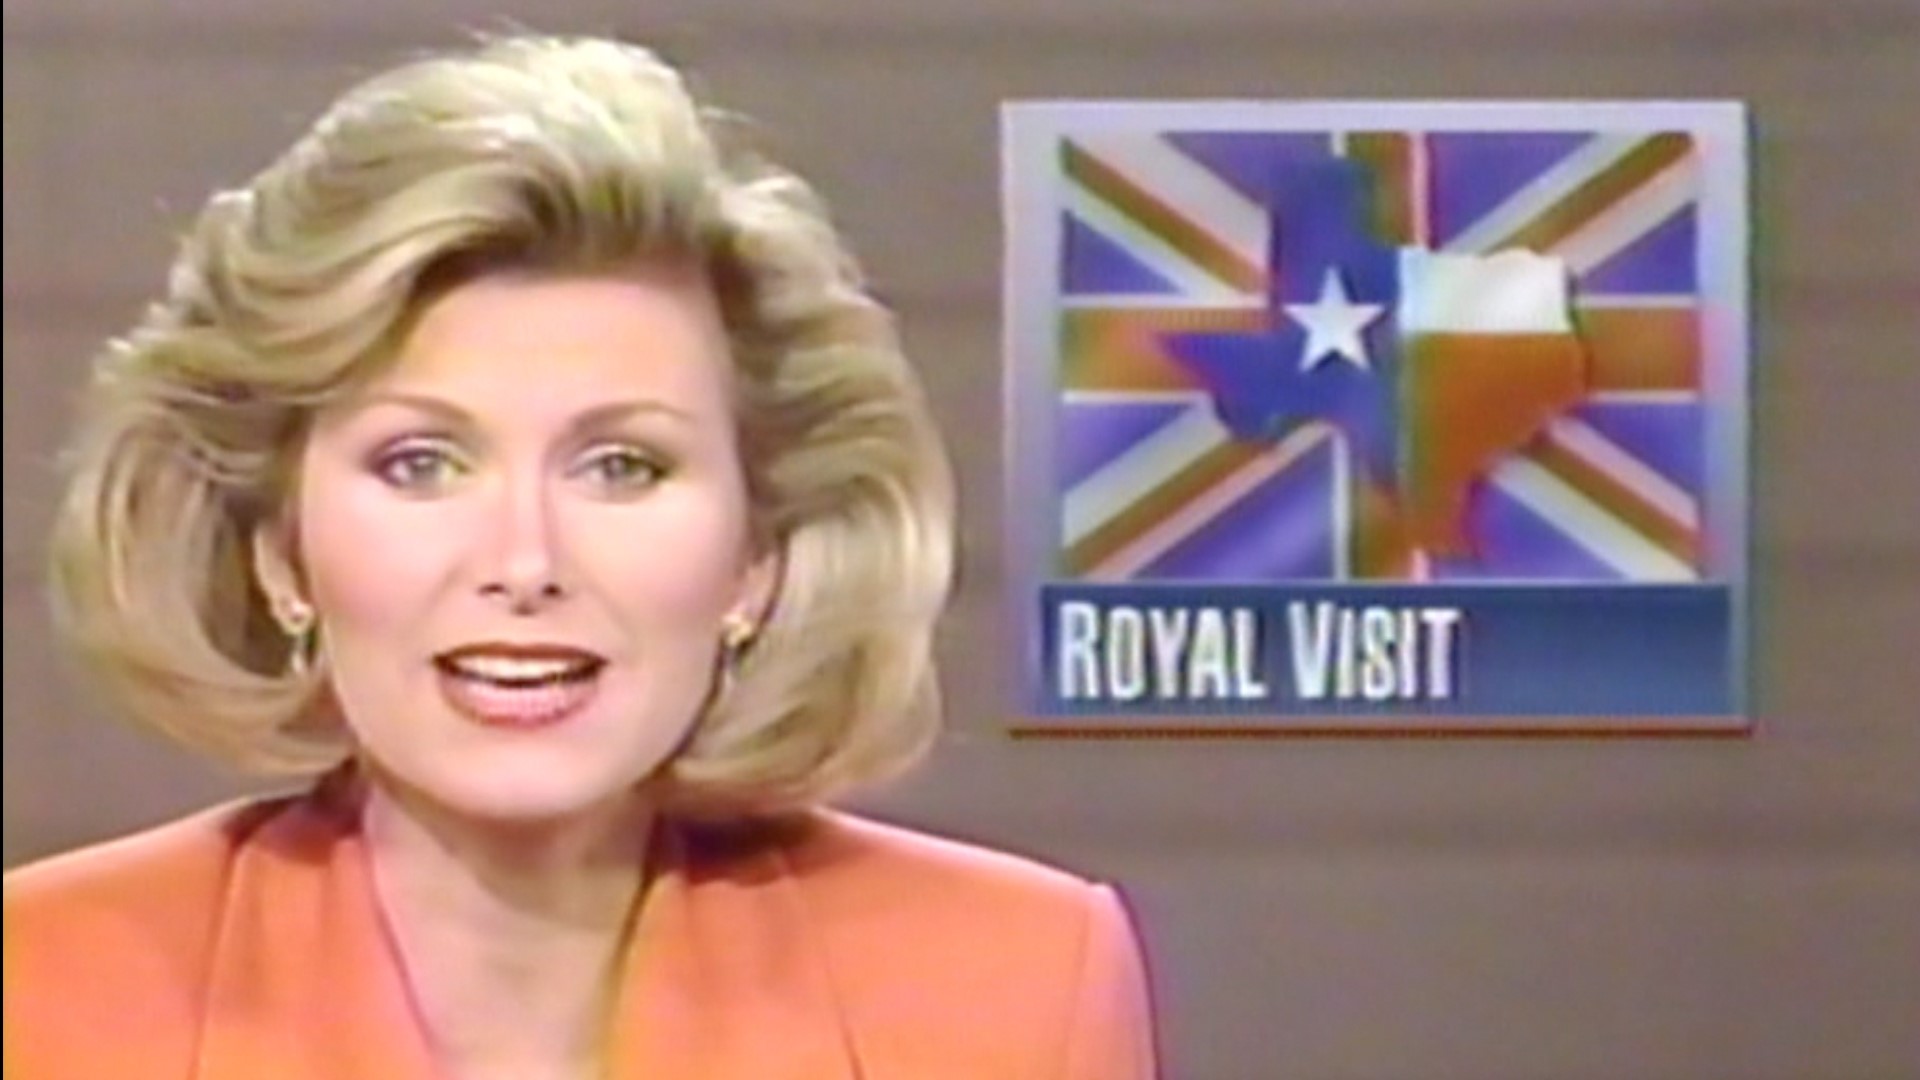 WFAA News at 5 on May 21, 1991 covered Queen Elizabeth II's visit to the Lone Star State.